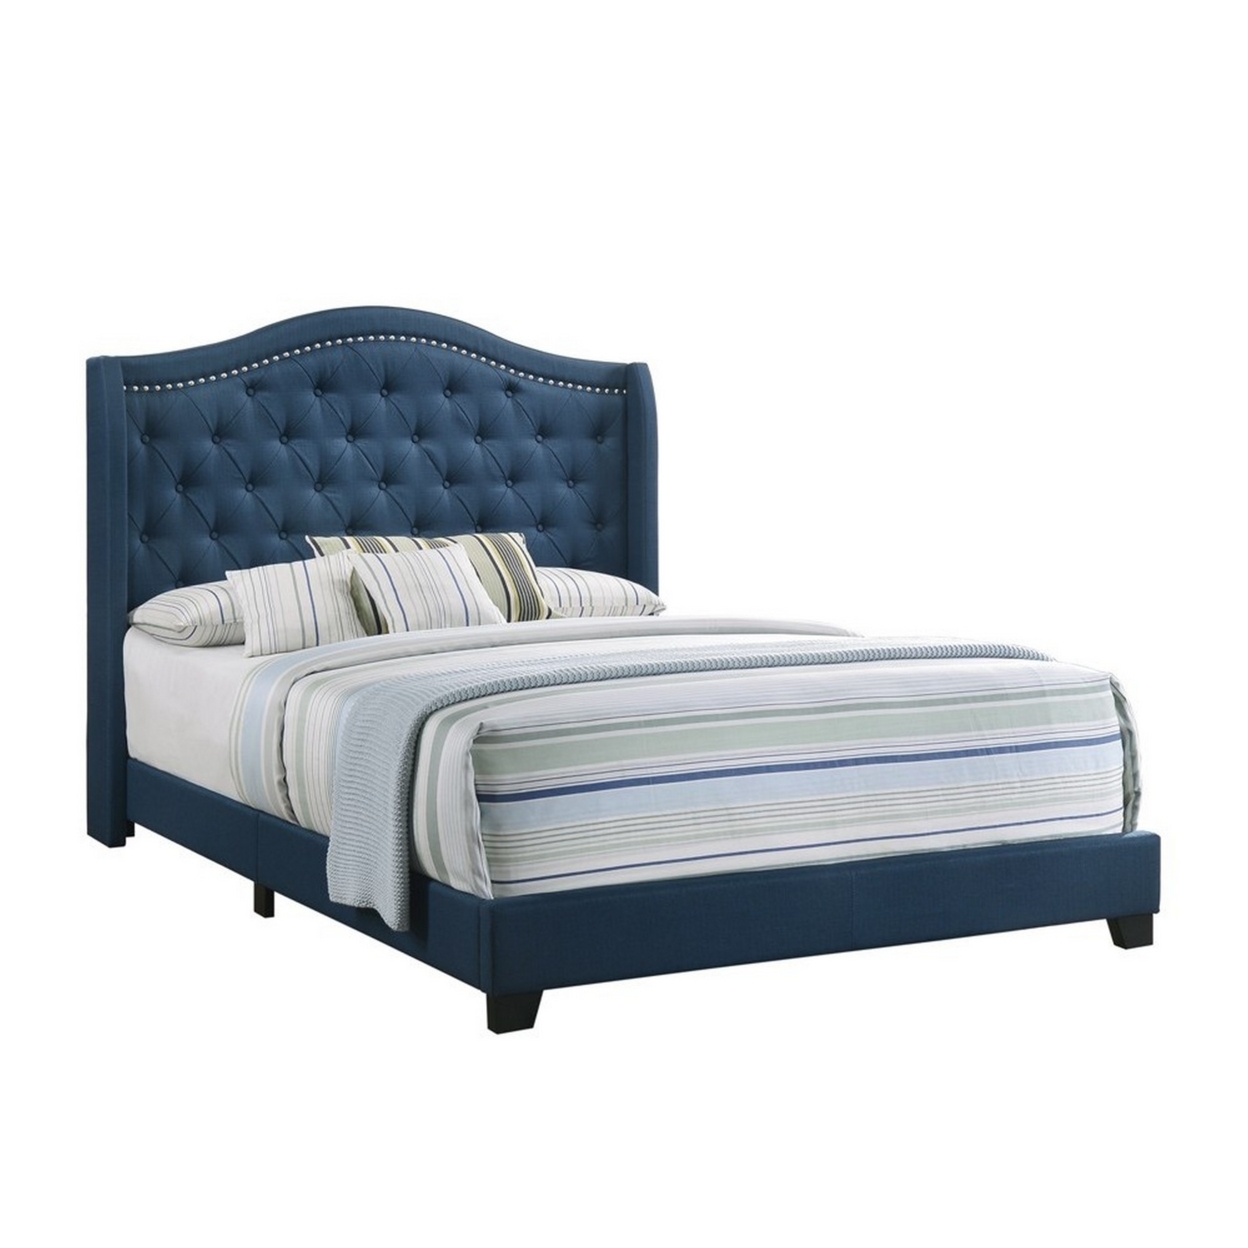 Fabric Upholstered Wooden Demi Wing Full Bed With Camelback Headboard, Blue- Saltoro Sherpi